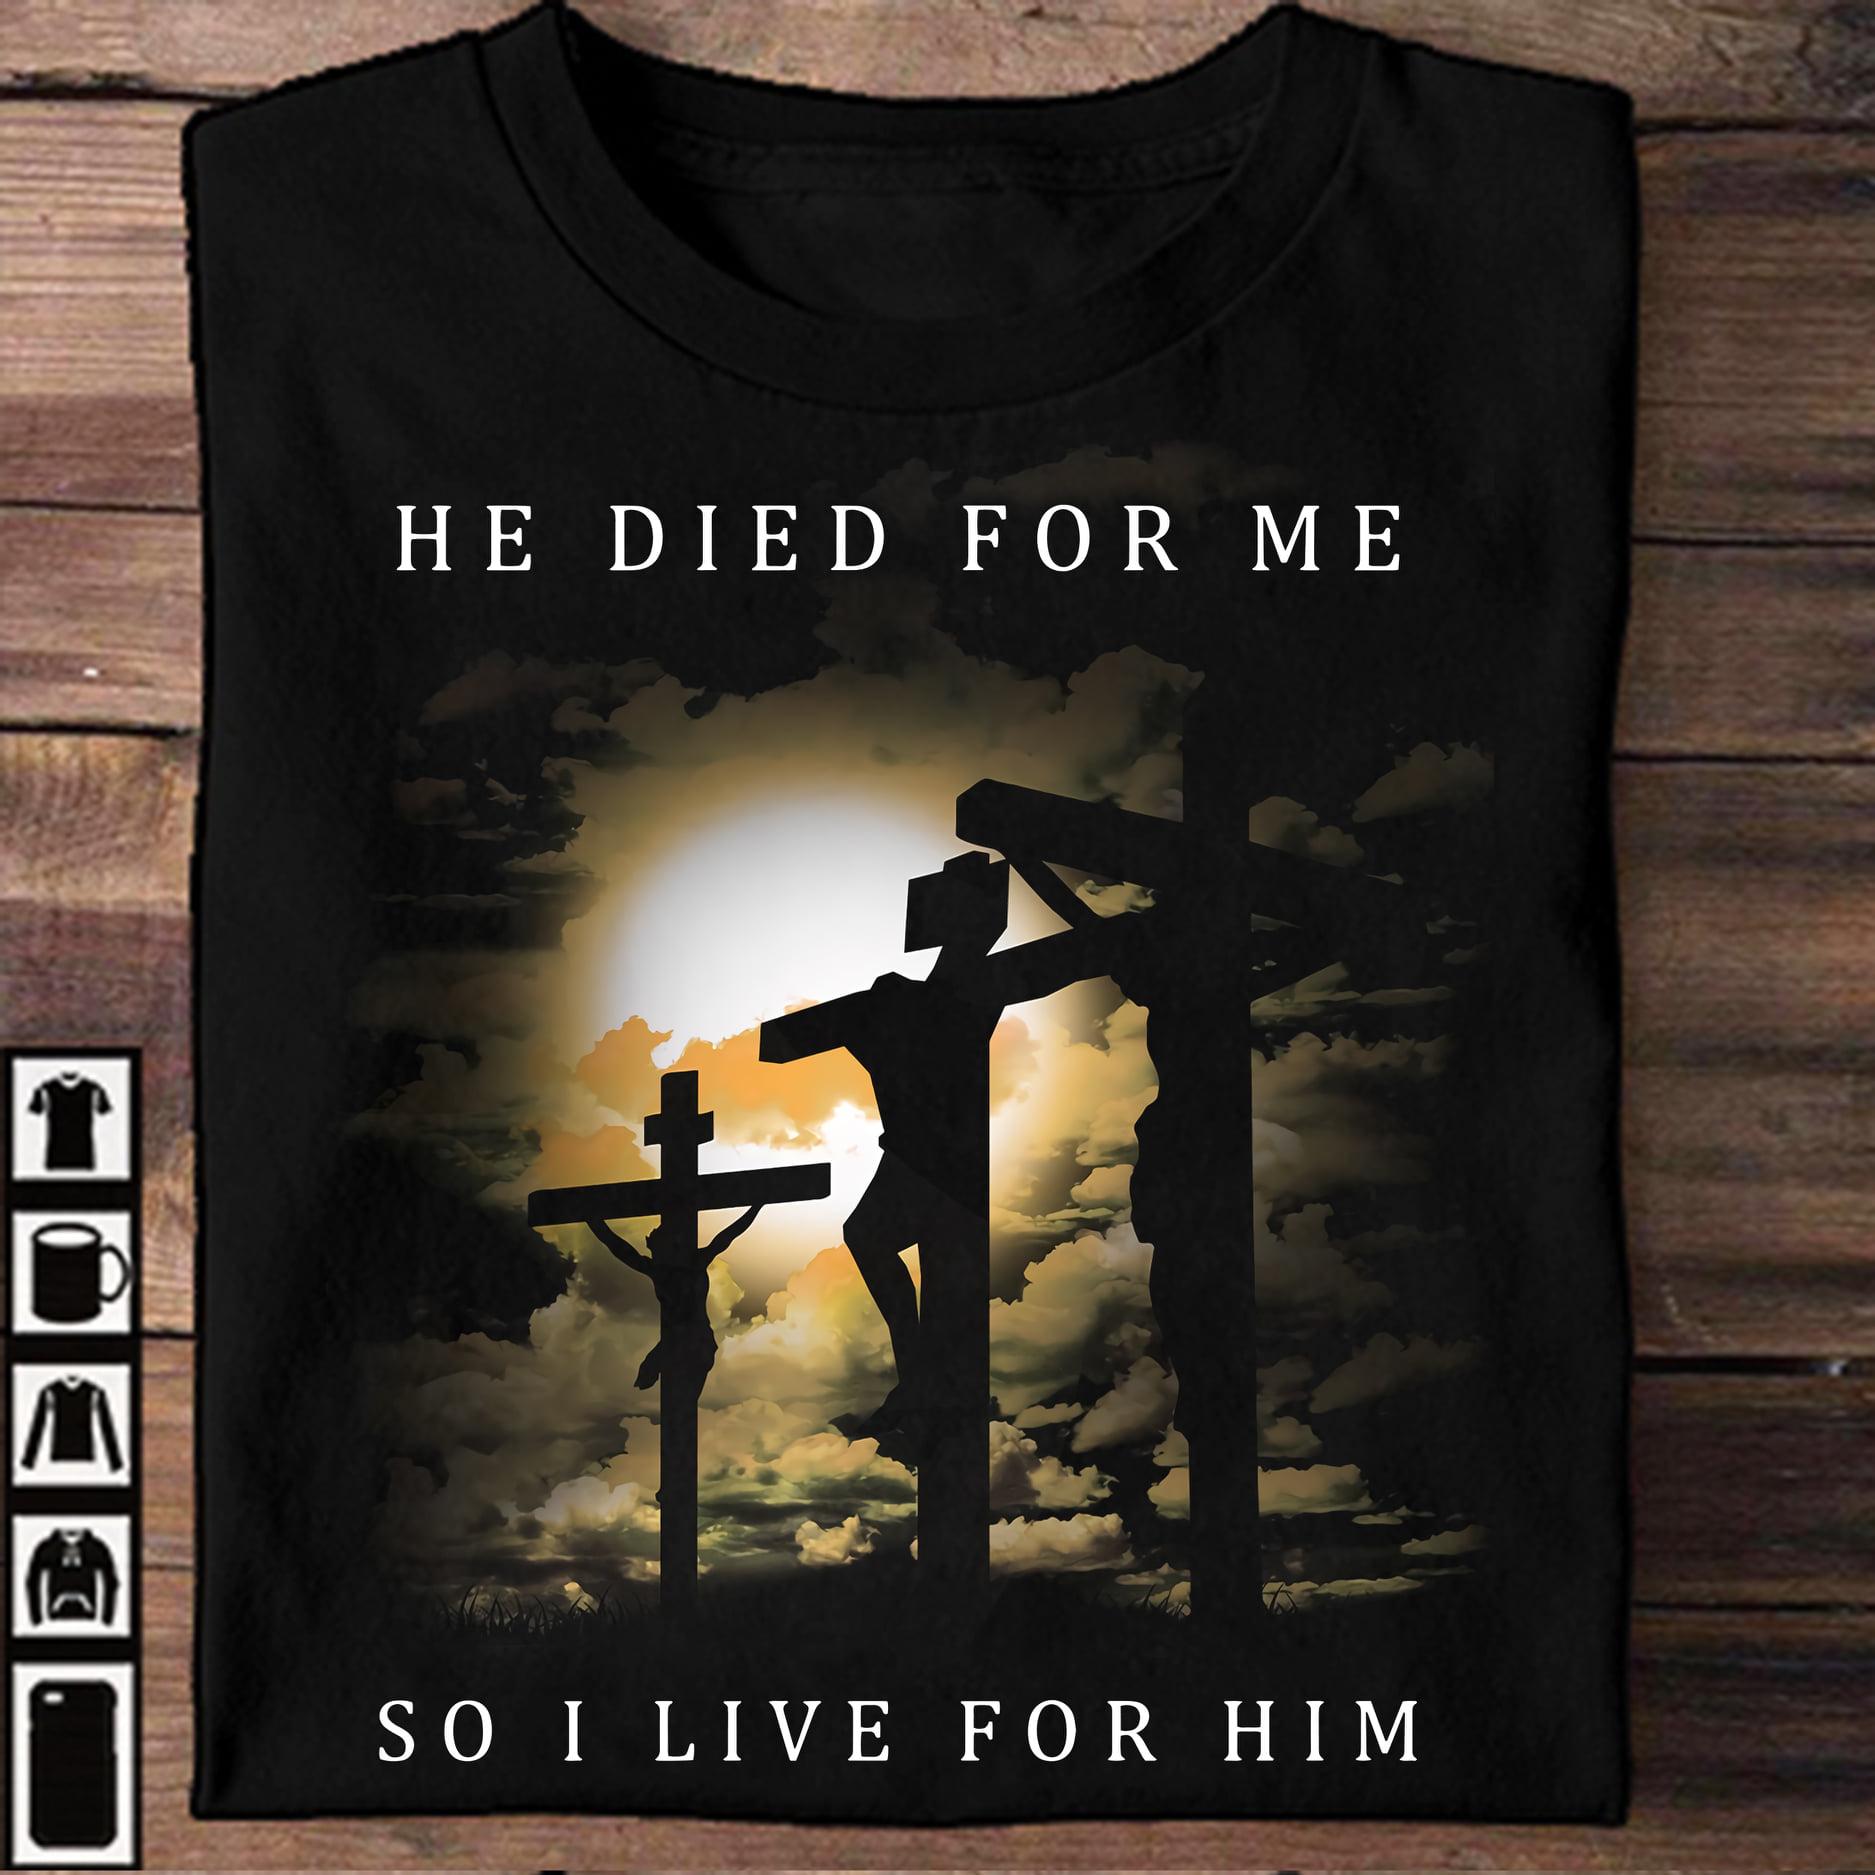 He died for me so I live for him - Jesus the god, believe in Jesus, T-shirt for Christmas